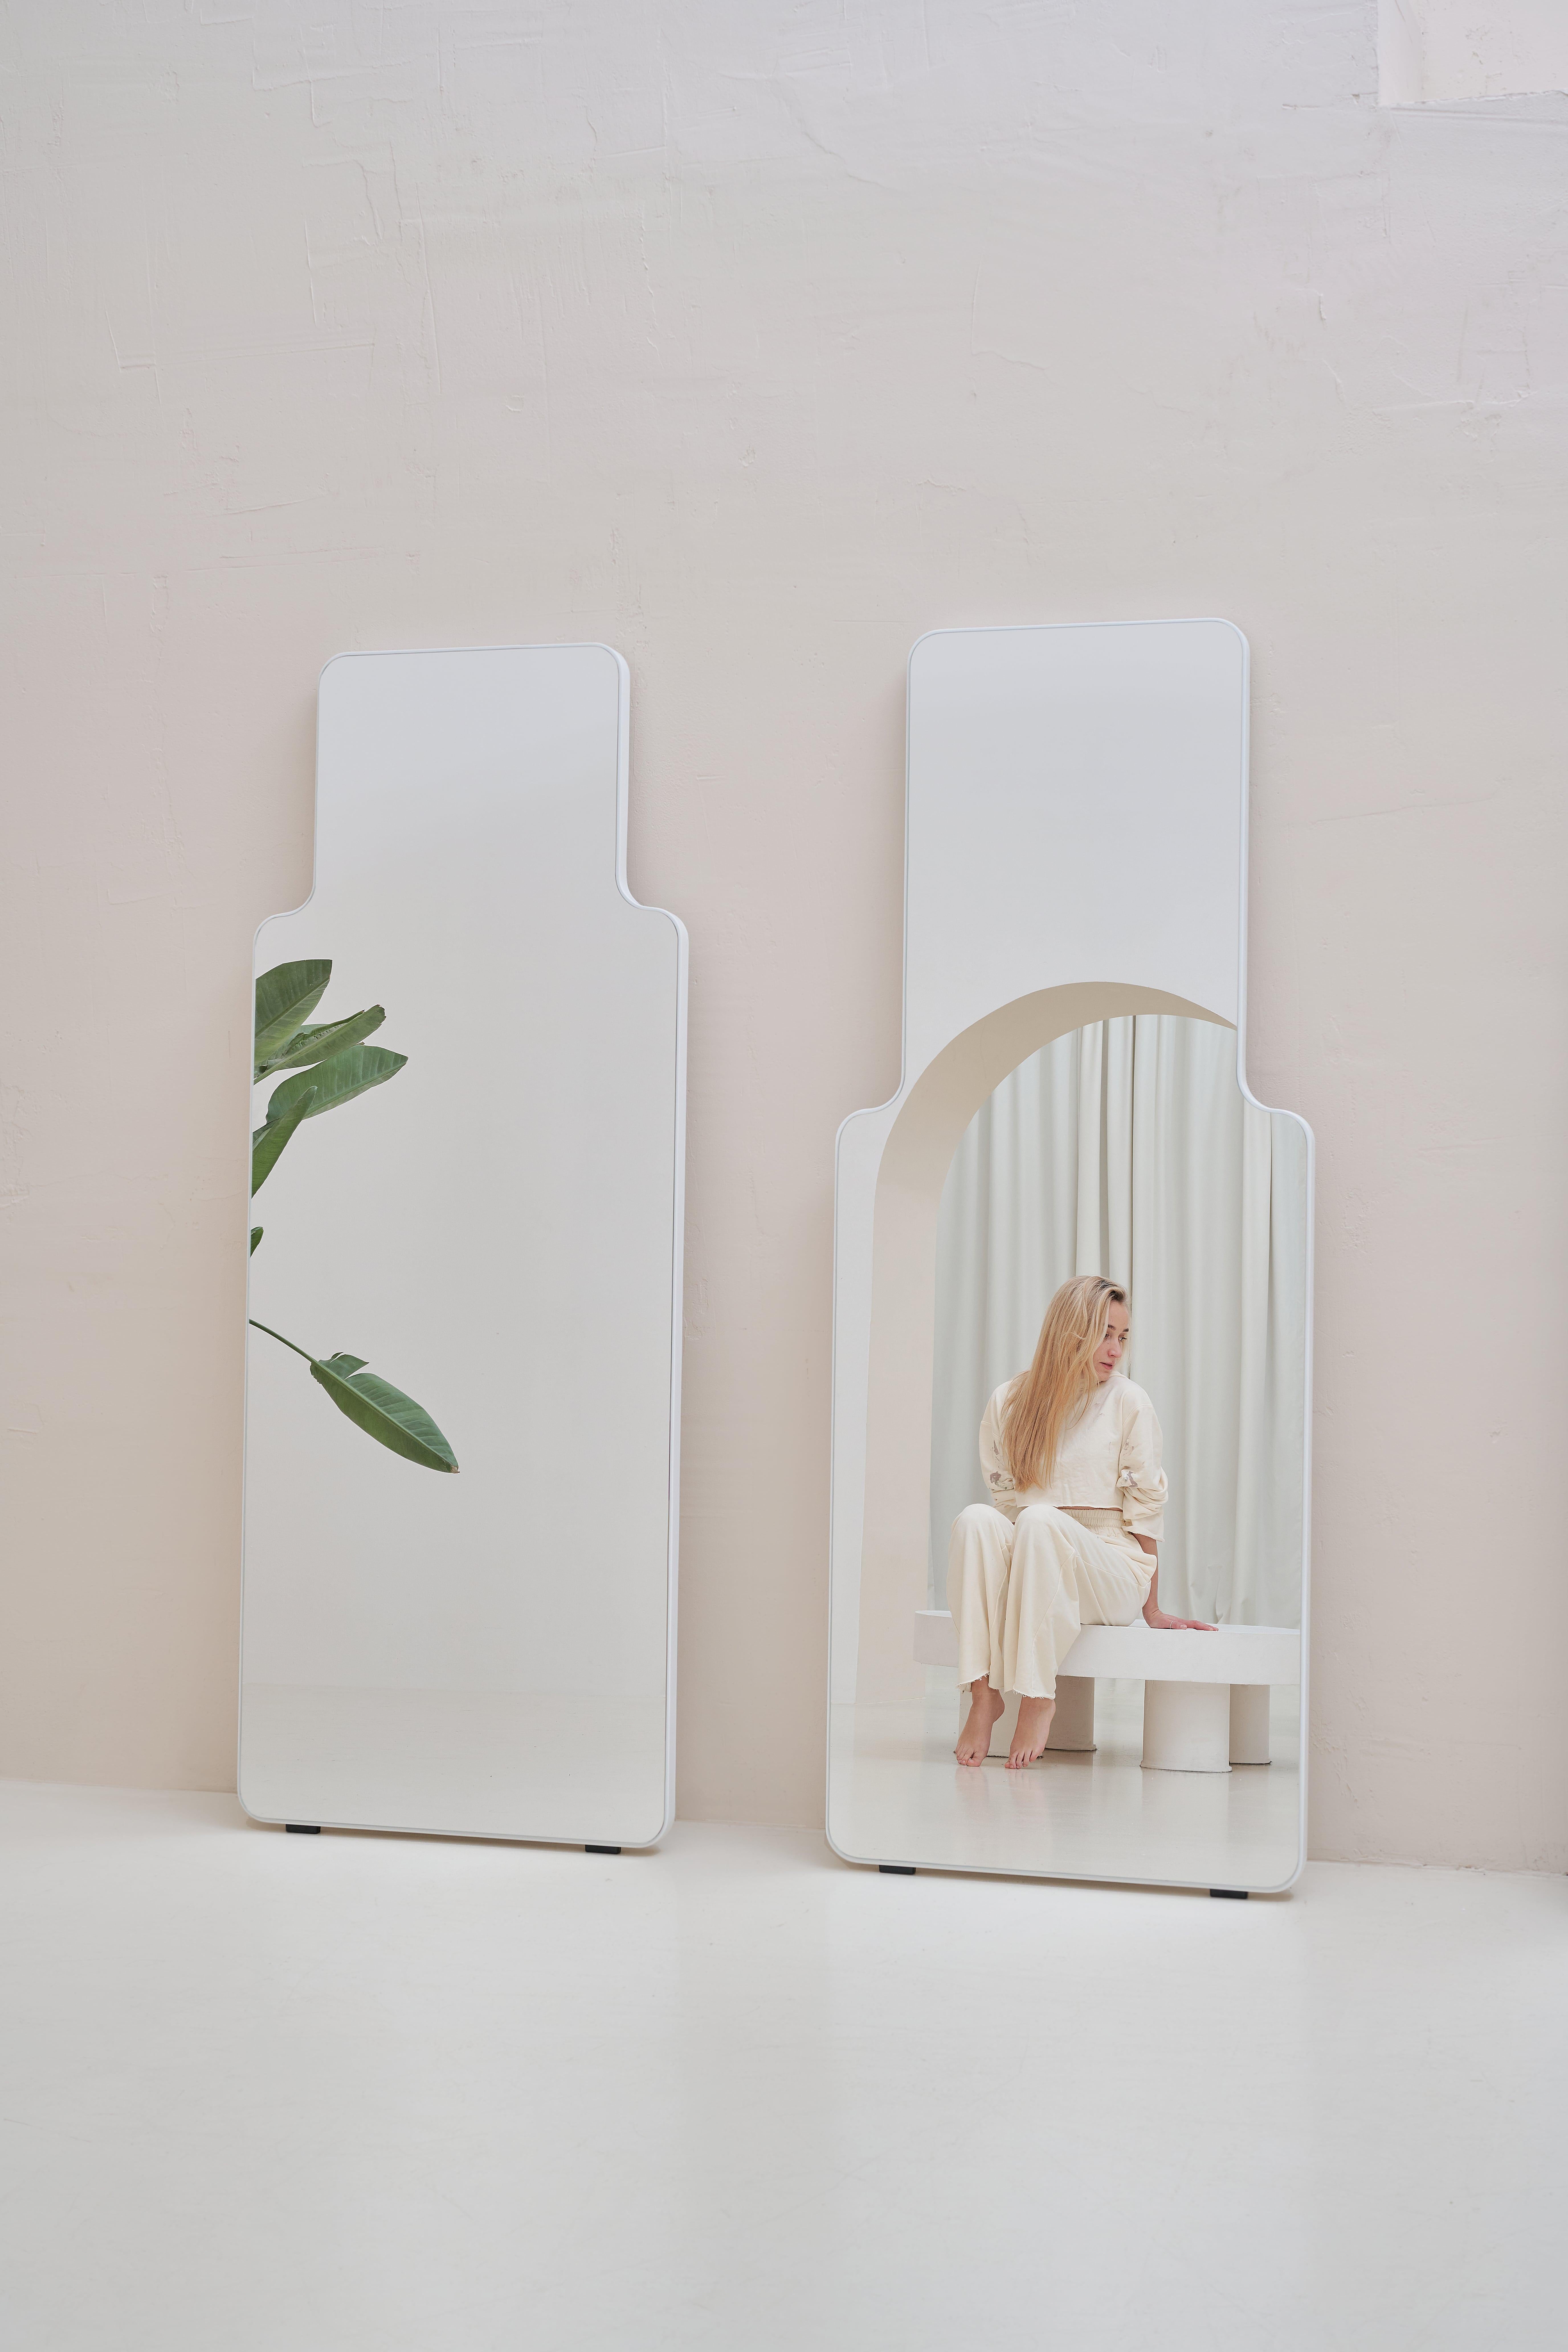 Contemporary Mirror 'Loveself 02' by Oitoproducts, Green Frame For Sale 3